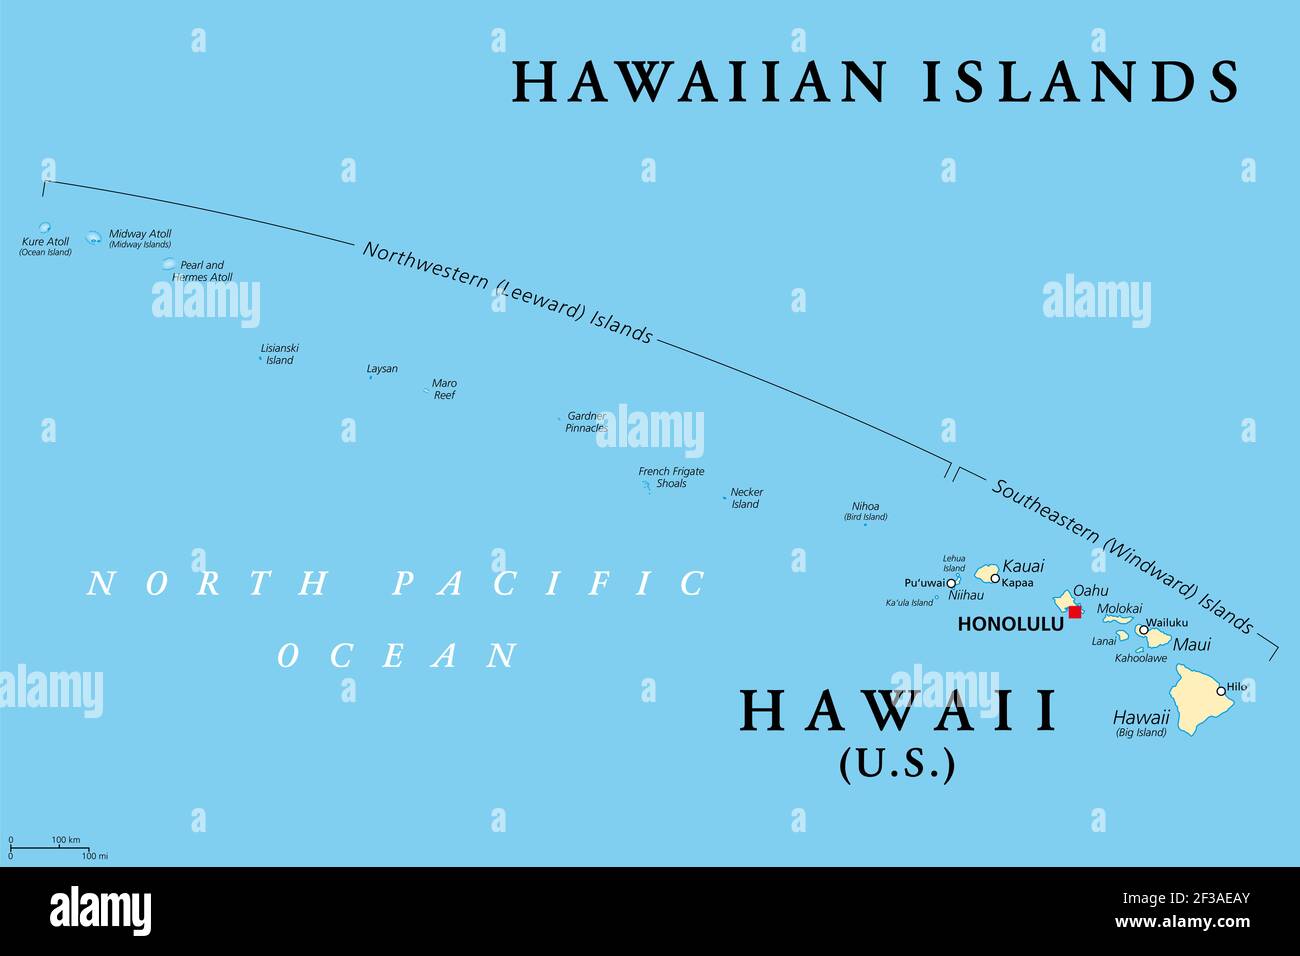 Hawaiian Islands, political map. U.S. state of Hawaii with capital Honolulu and the unincorporated territory Midway Island. Archipelago in the Pacific Stock Photo